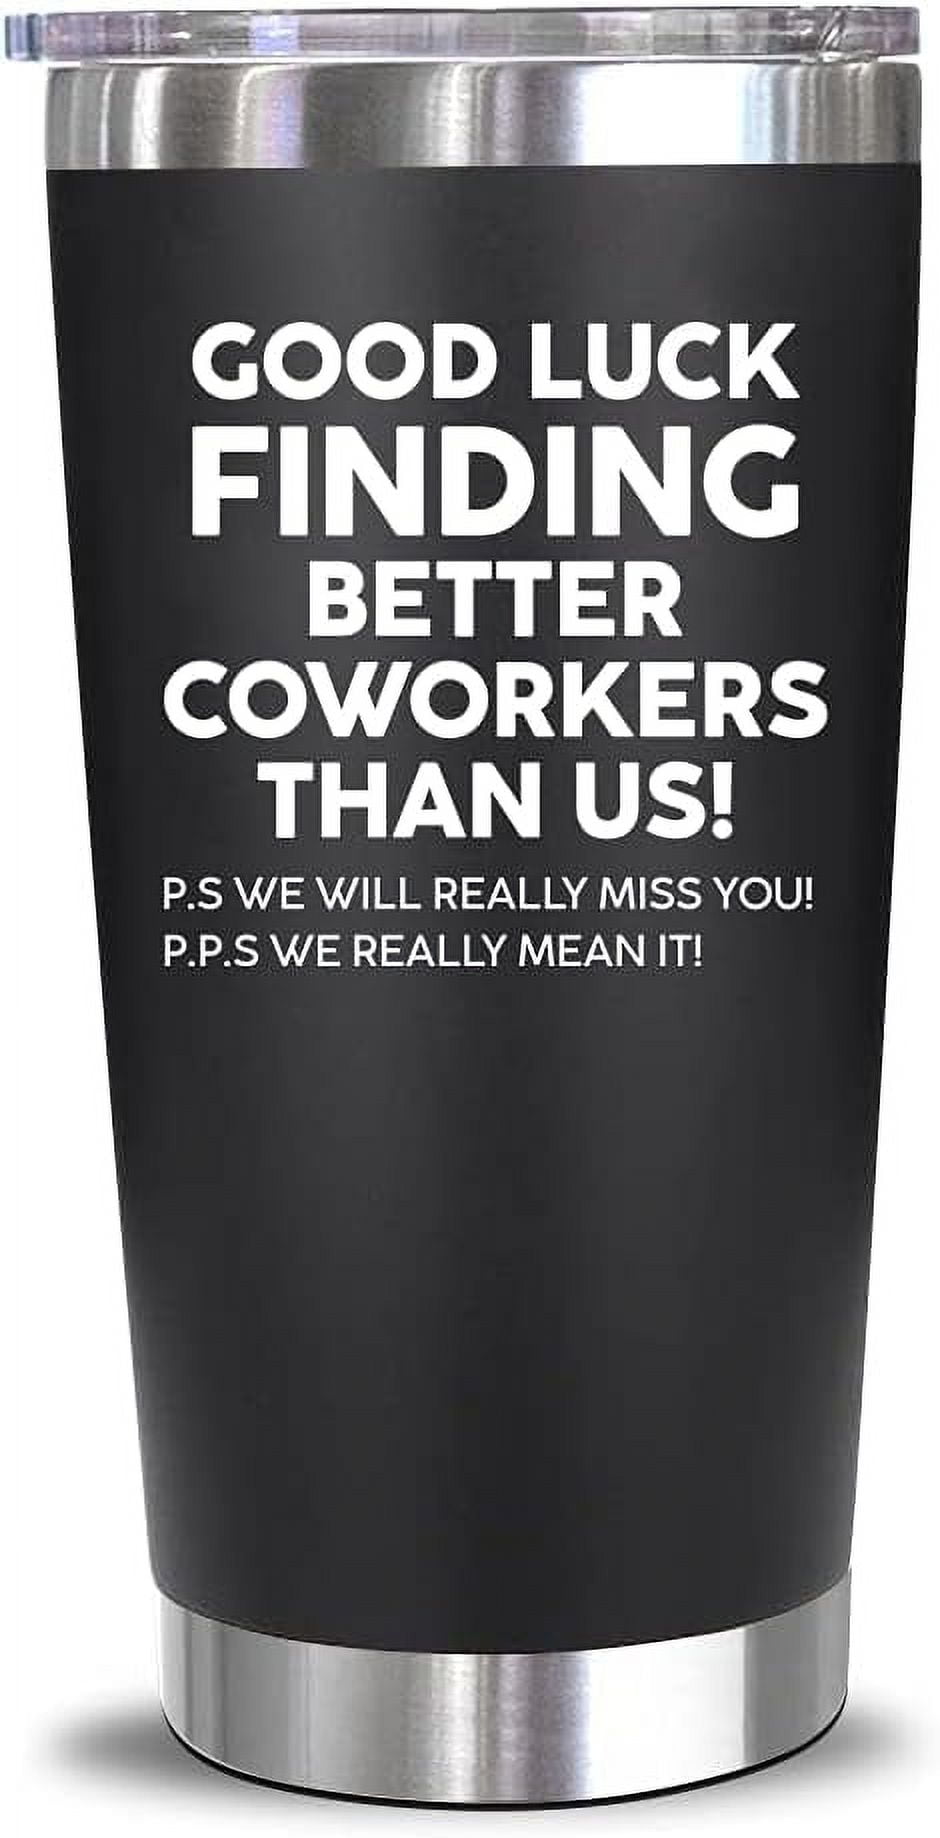 Coworker Leaving Gifts Farewell Gifts Going Away Gift For New Job Goodbye Good Luck Coworkers Colleagues Boss Men Women Friends 20 Oz Tumbler efeff149 6a88 4365 9465 e69ec802e59f.b12141d8672f125ea236495d6a1eac37